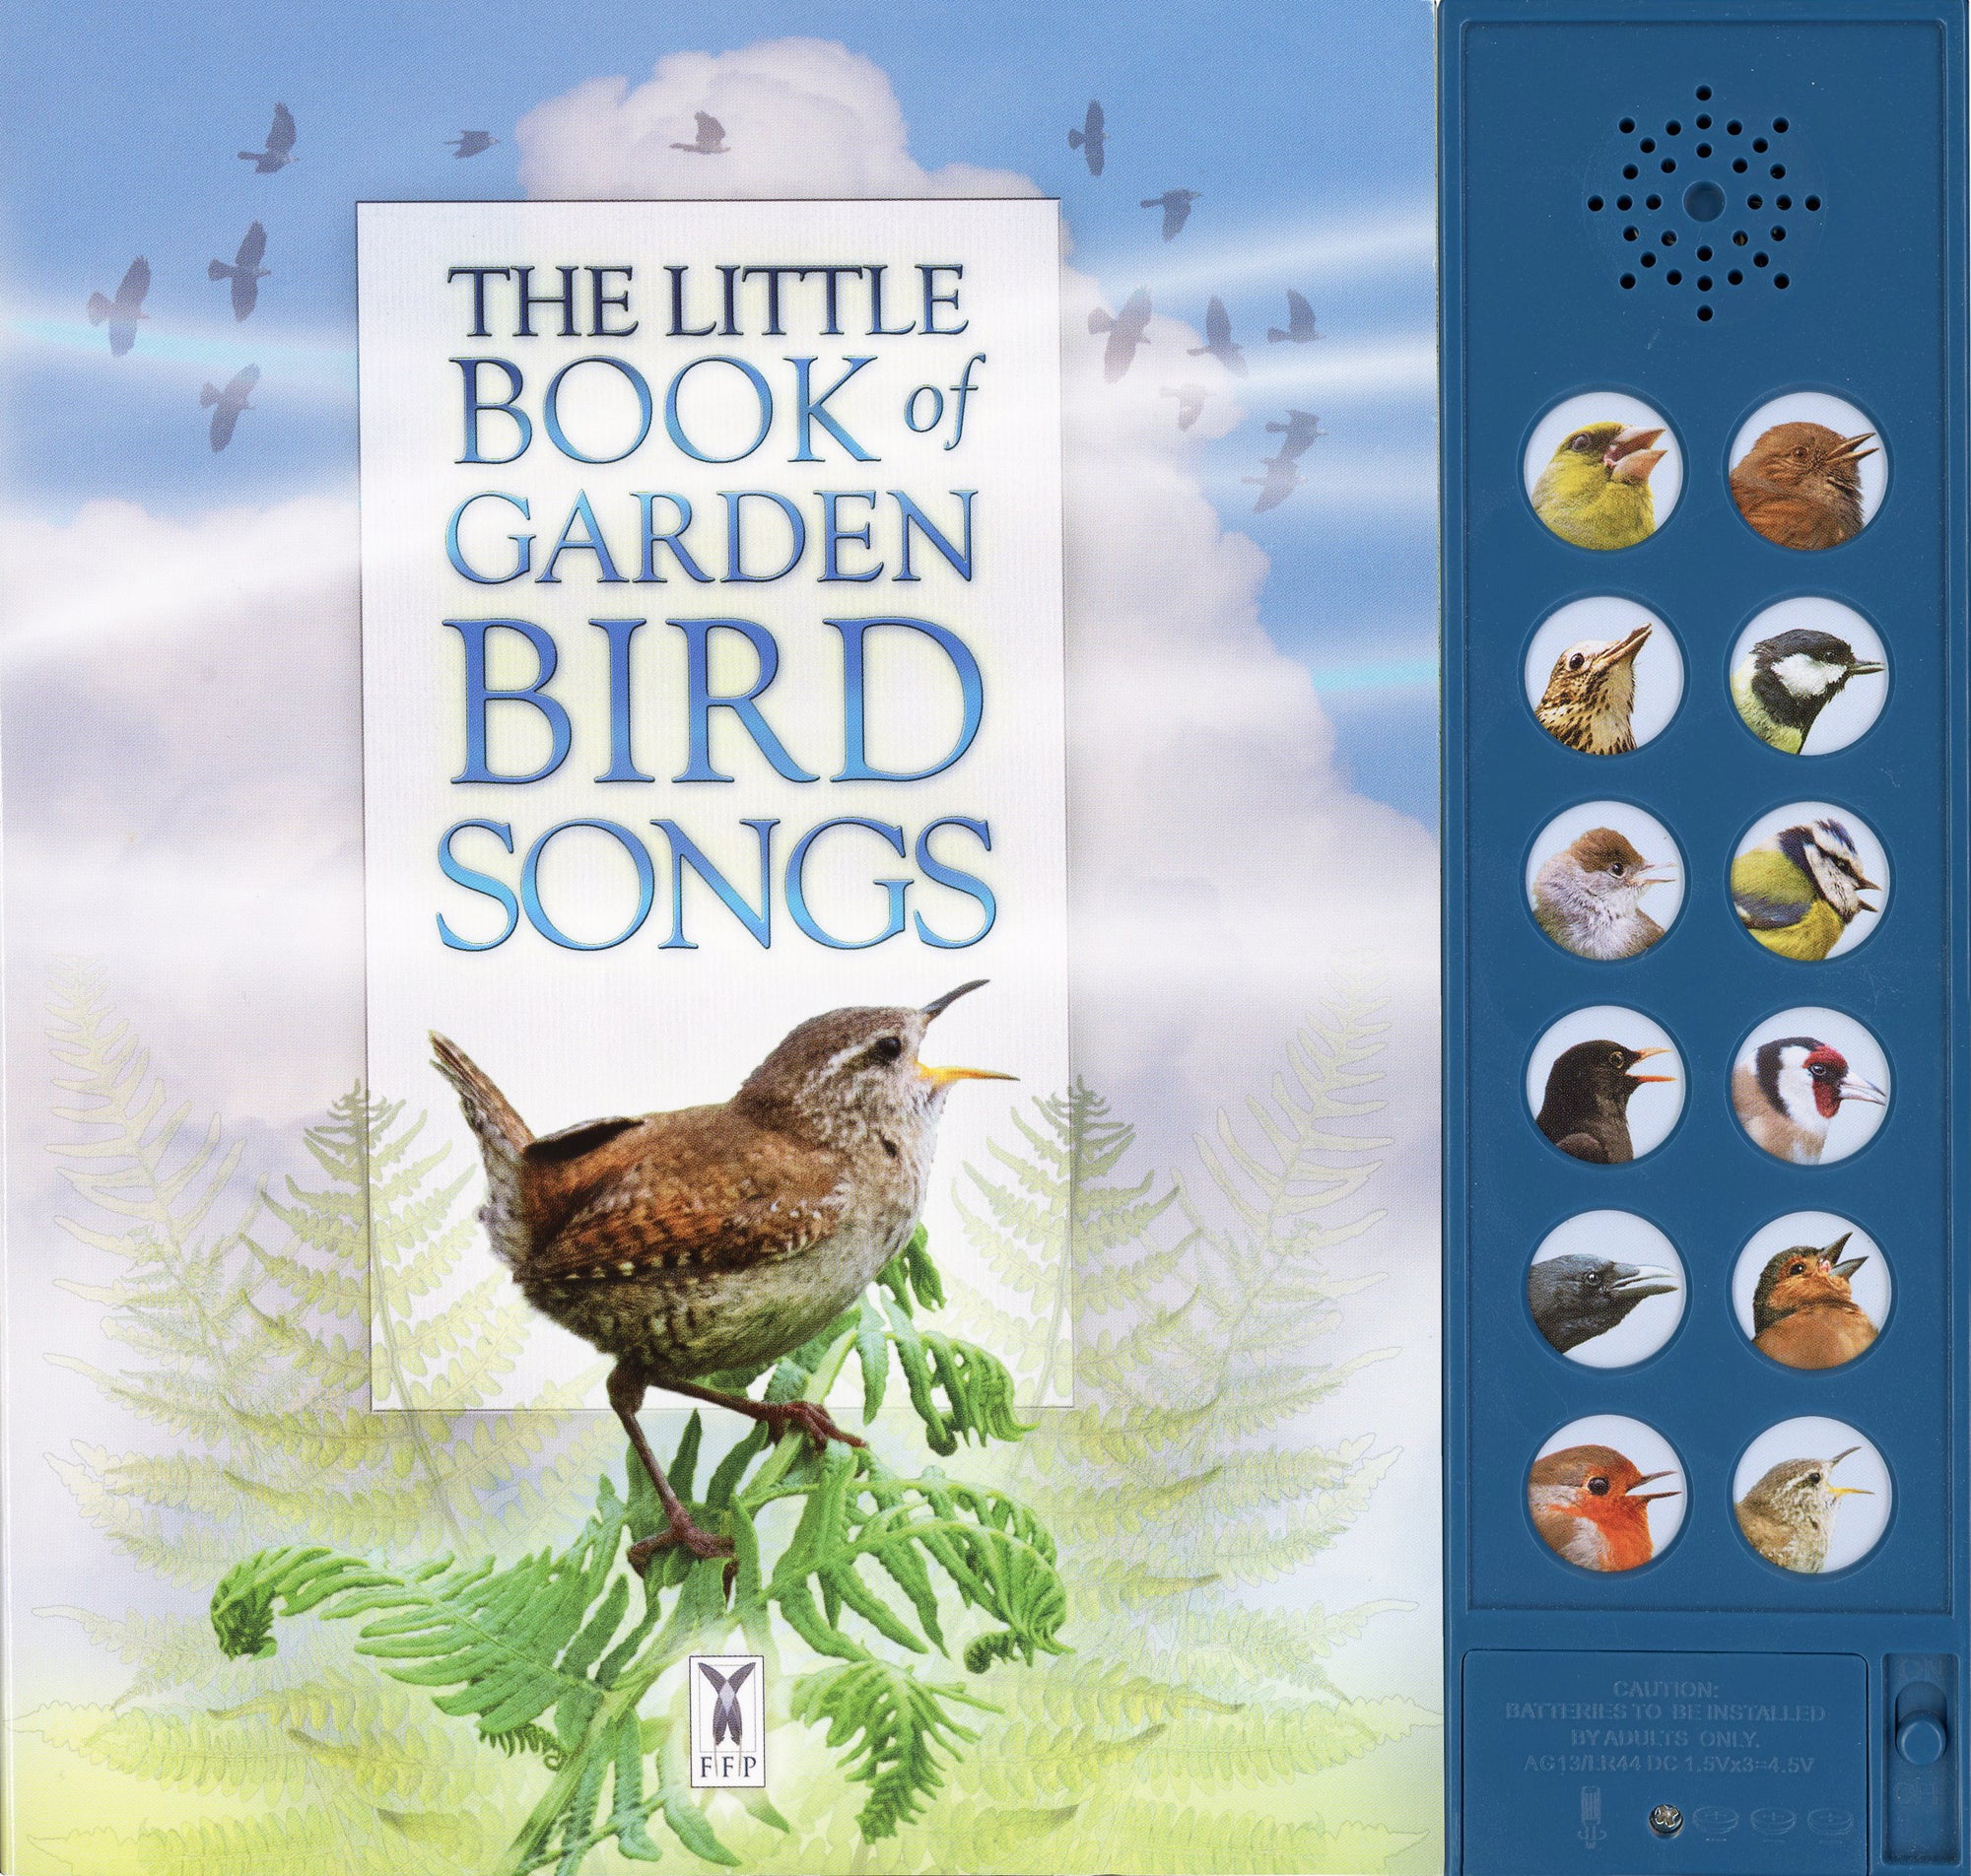 The little book of garden bird songs is a colour - illustrated book with a large, centrally-positioned title panel. To the right of the book there is a blue plastic panel with a speaker at the top and two columns of six buttons, each displaying in colour the head of a different  garden bird.  When pressed, the song of that particular bird will be played via the speaker.